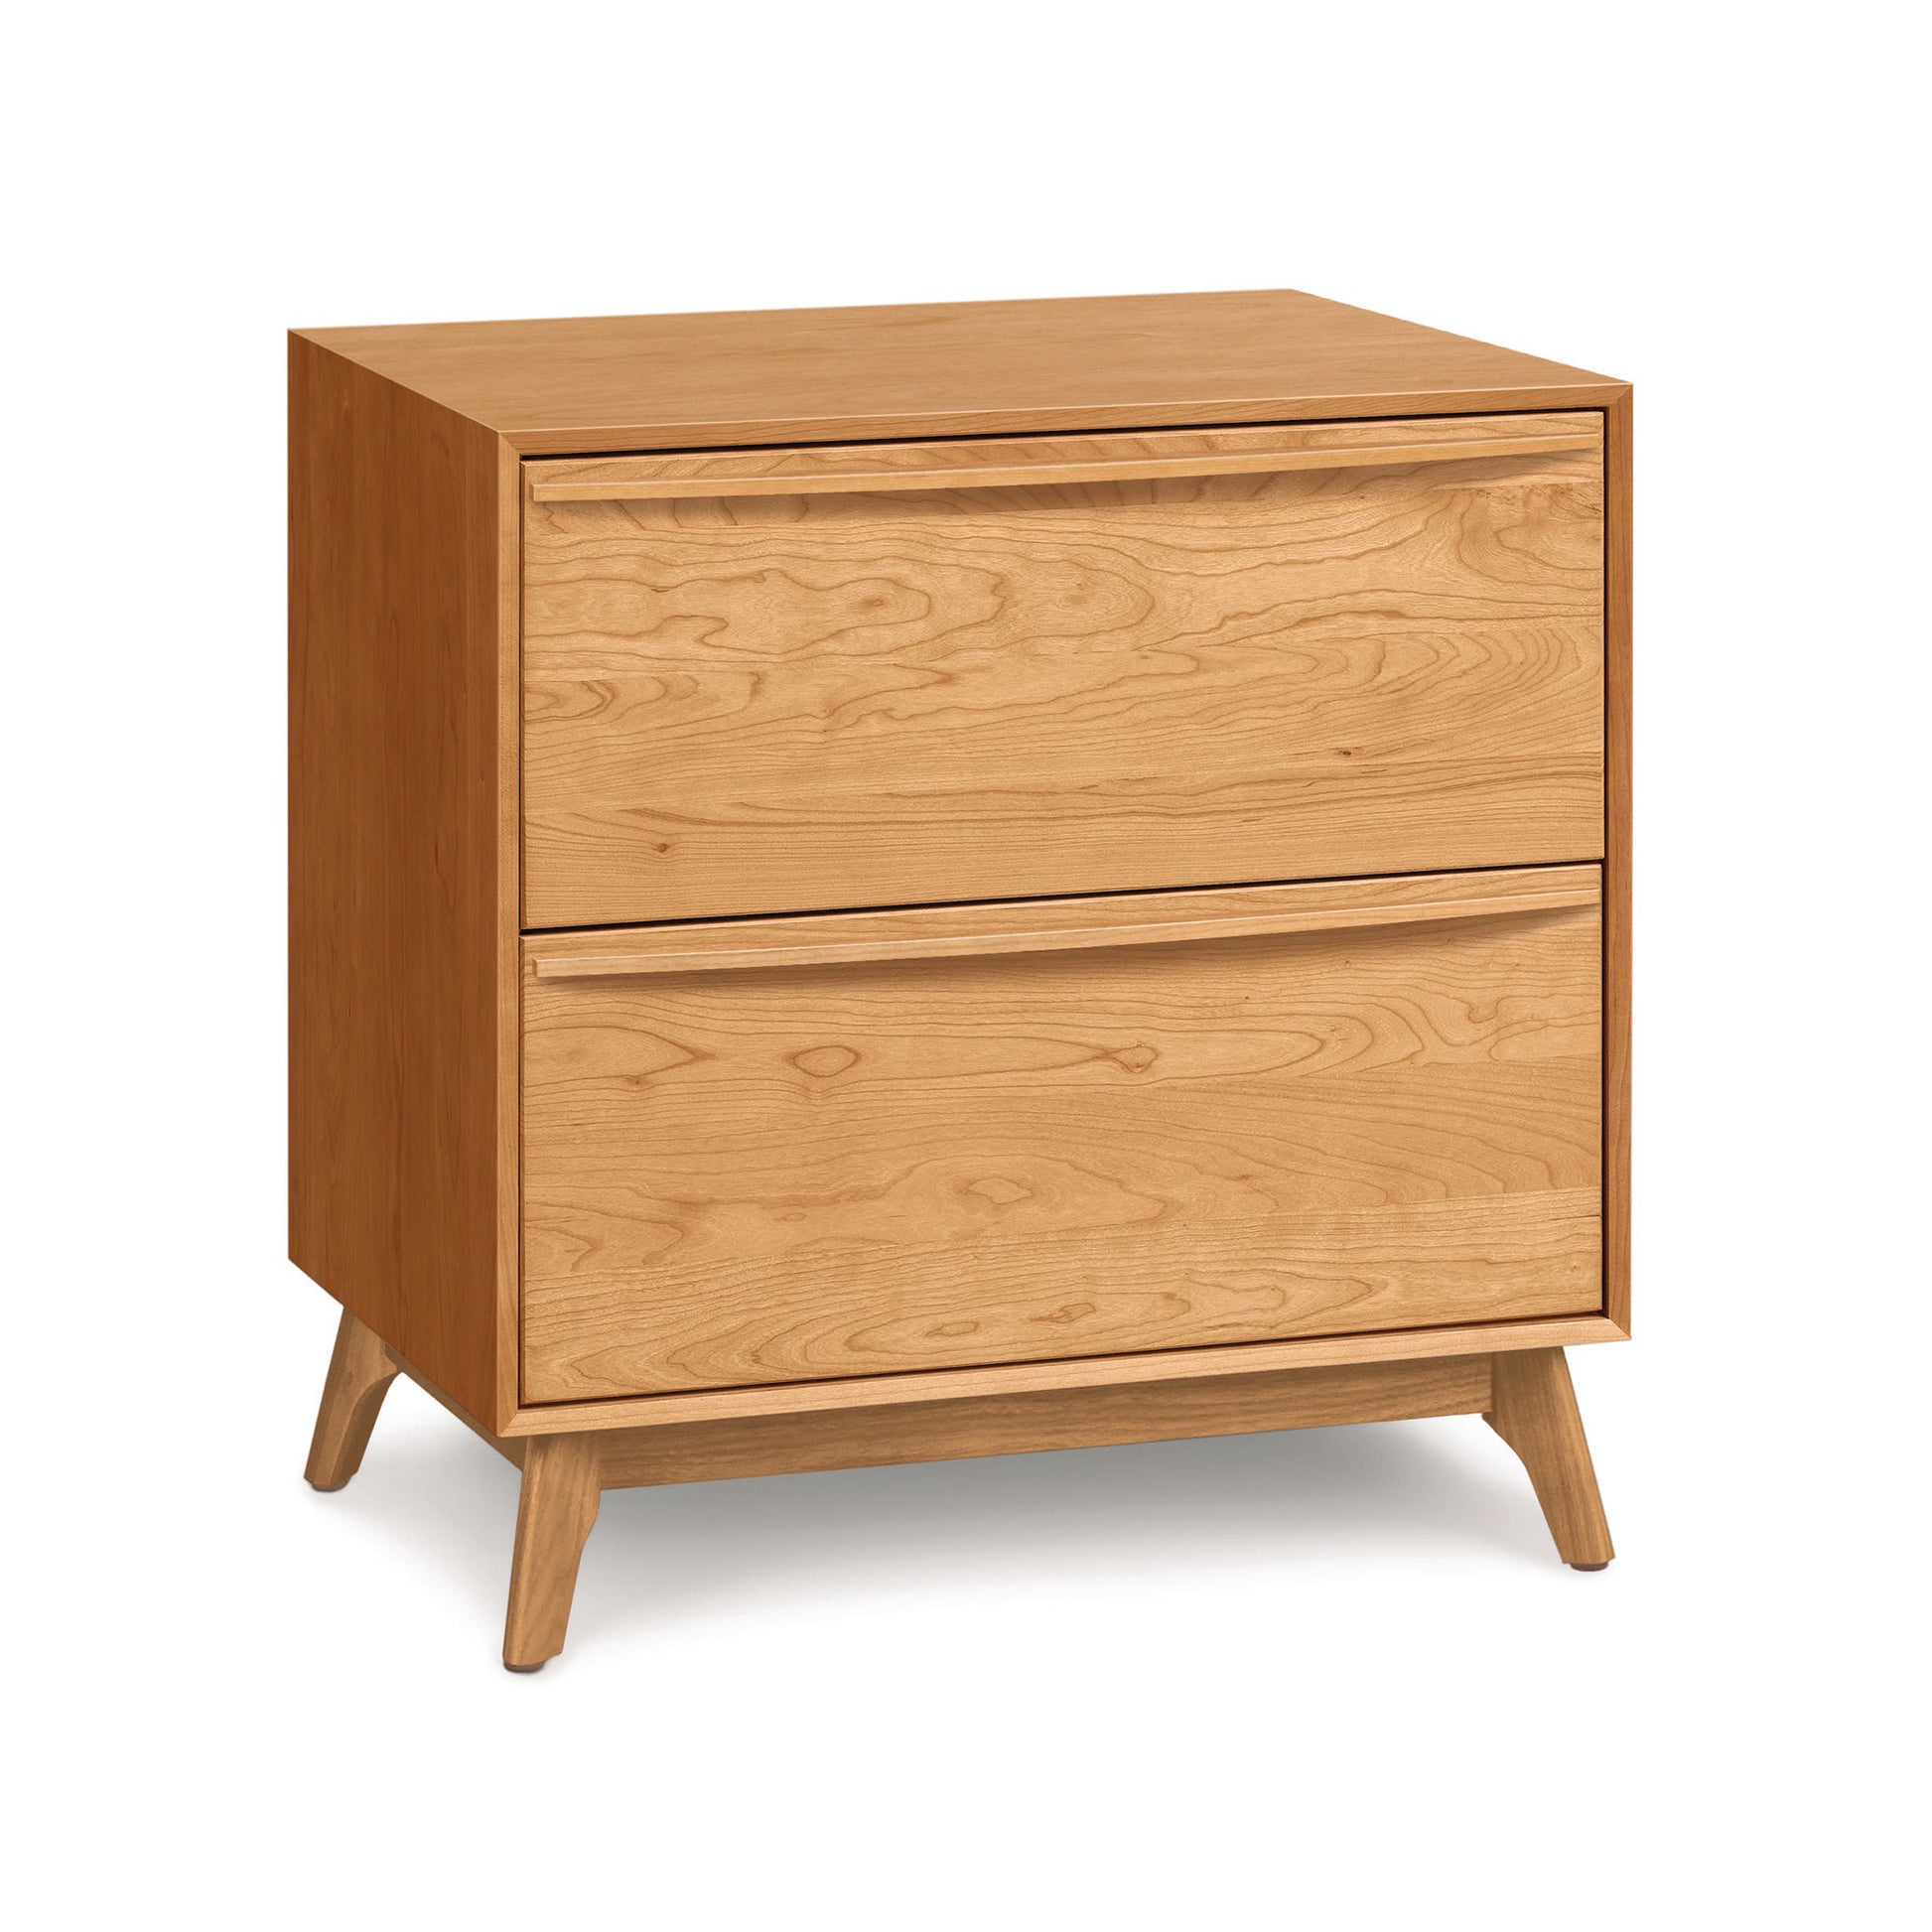 The Copeland Furniture Catalina 2-Drawer Nightstand is a contemporary style wooden nightstand handmade in Bradford. With its two spacious drawers, it offers ample storage space for your bedroom essentials.